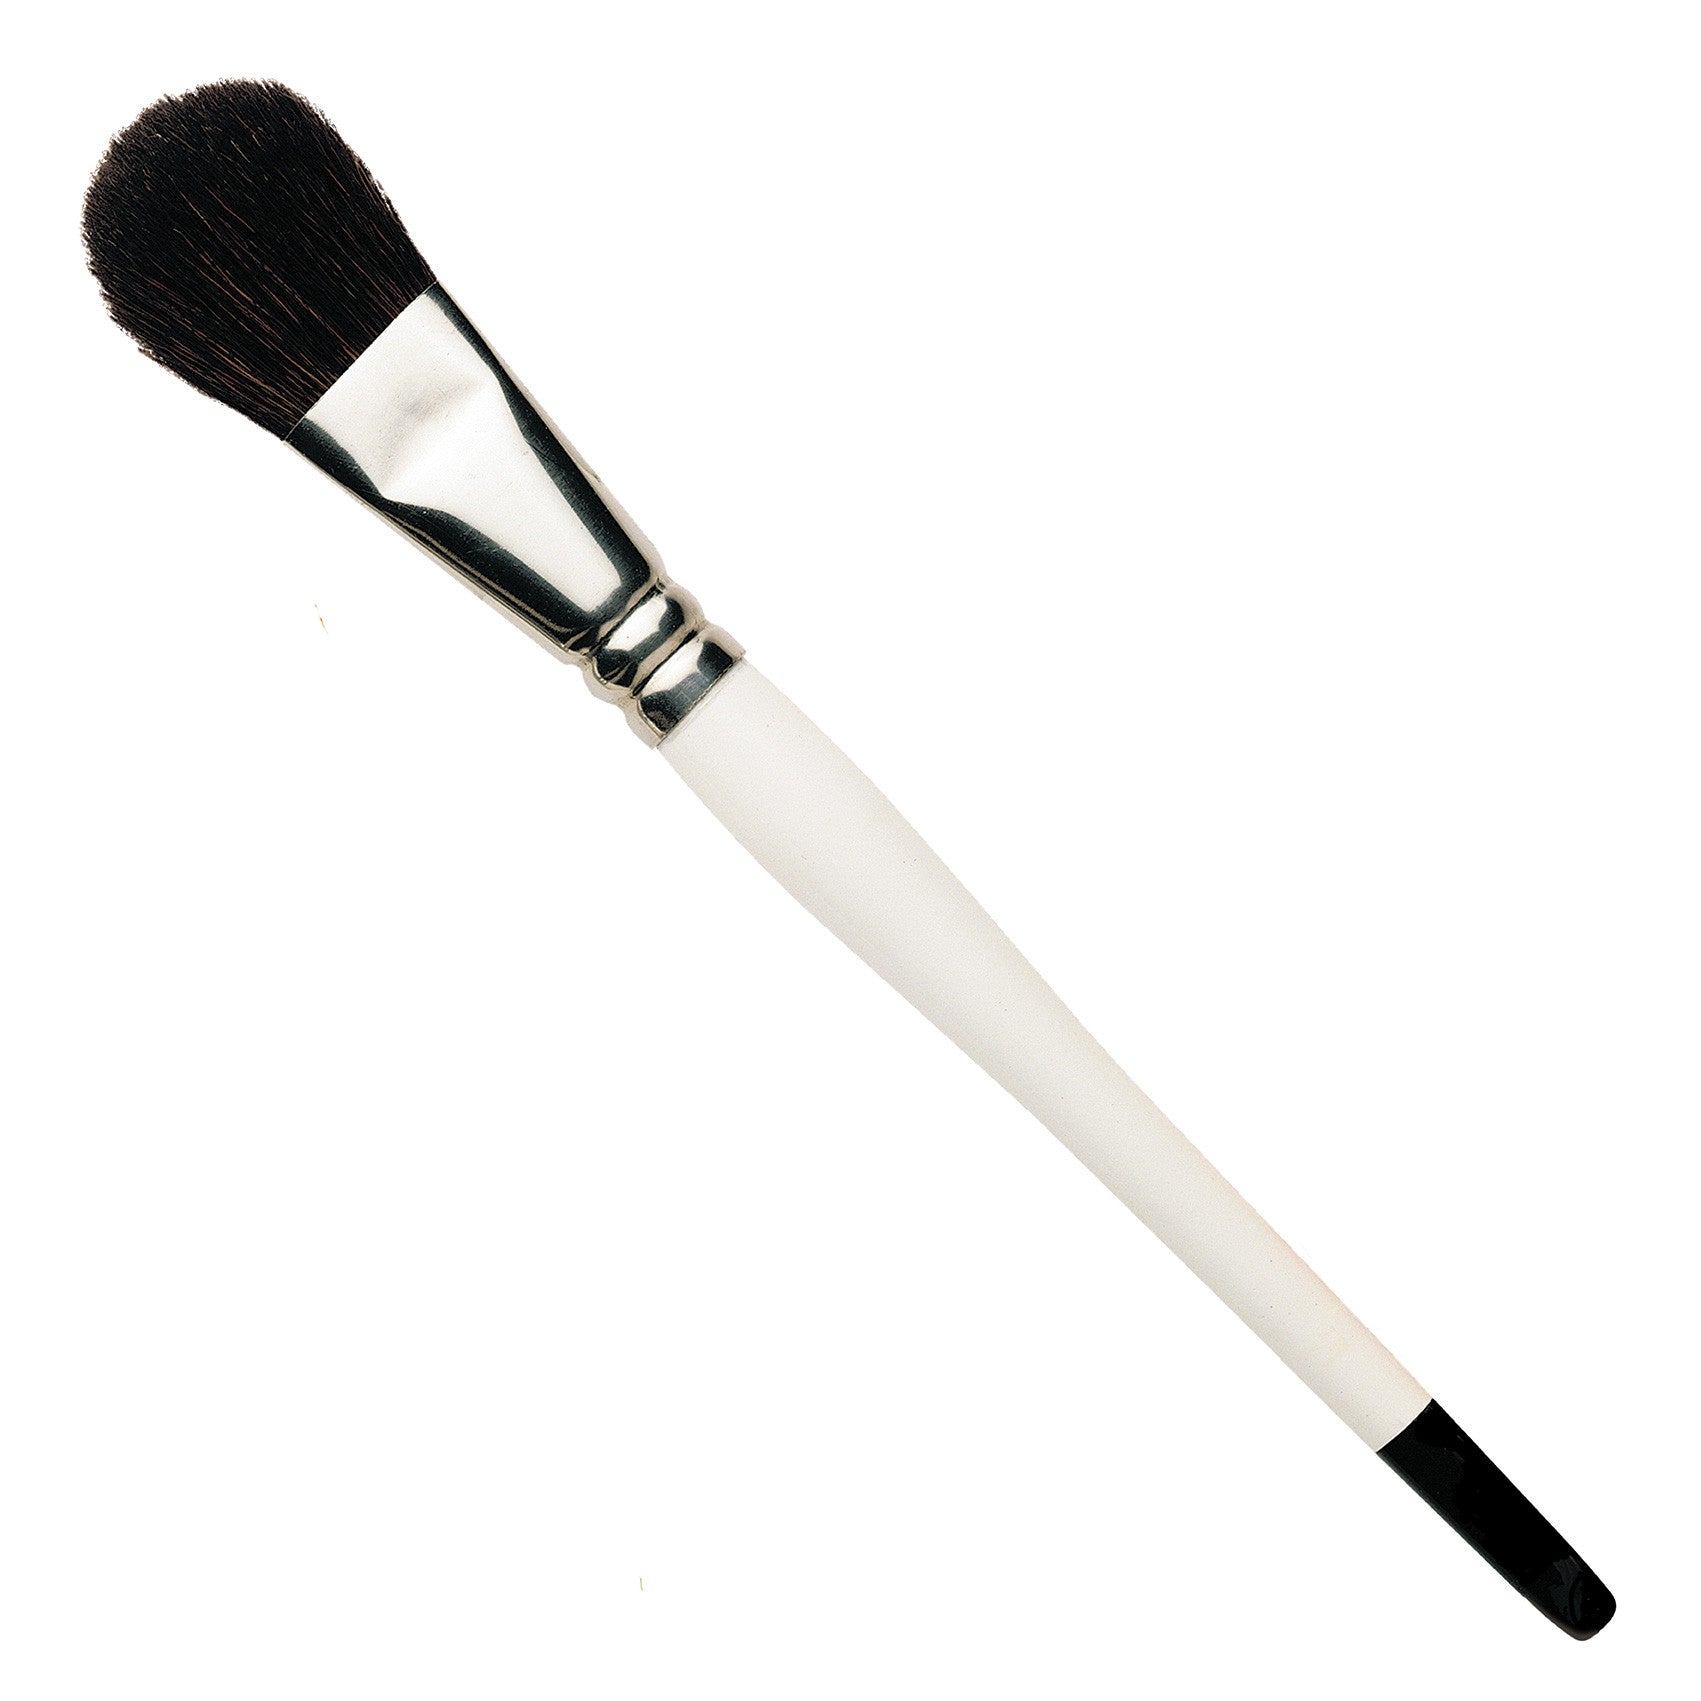 The Pro Arte Series 51 Wash brush is an economical choice, crafted with a mix of animal hairs perfect for all art mediums. The durable nickel brass ferrules and white polished handles ensure a long-lasting brush perfect for a variety of uses.